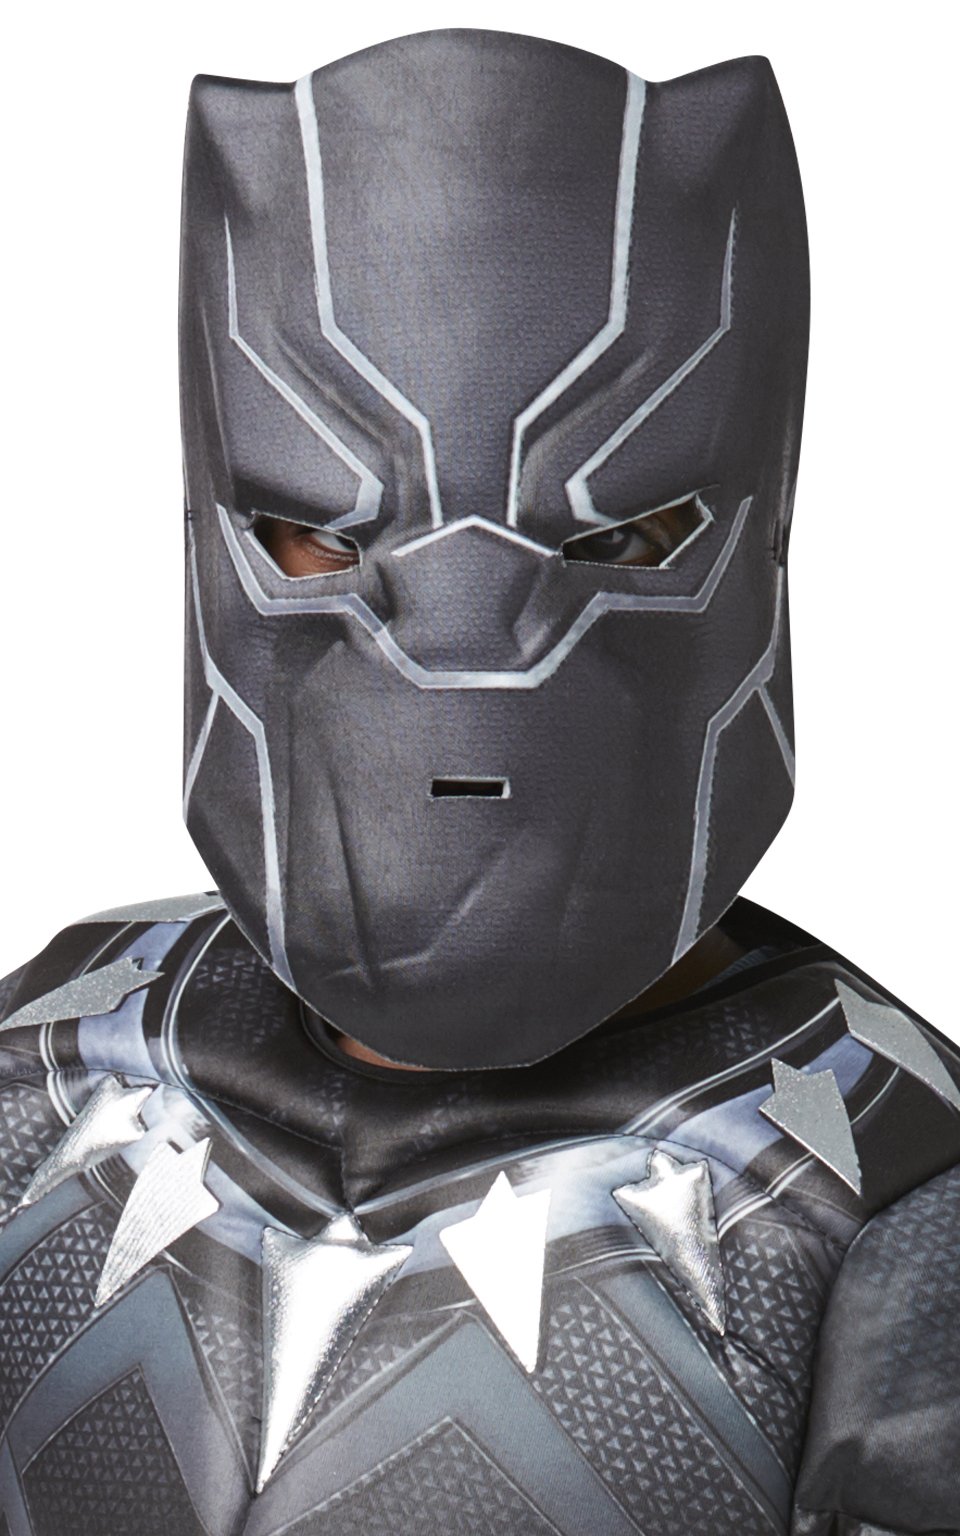 Boys Deluxe Black Panther Costume